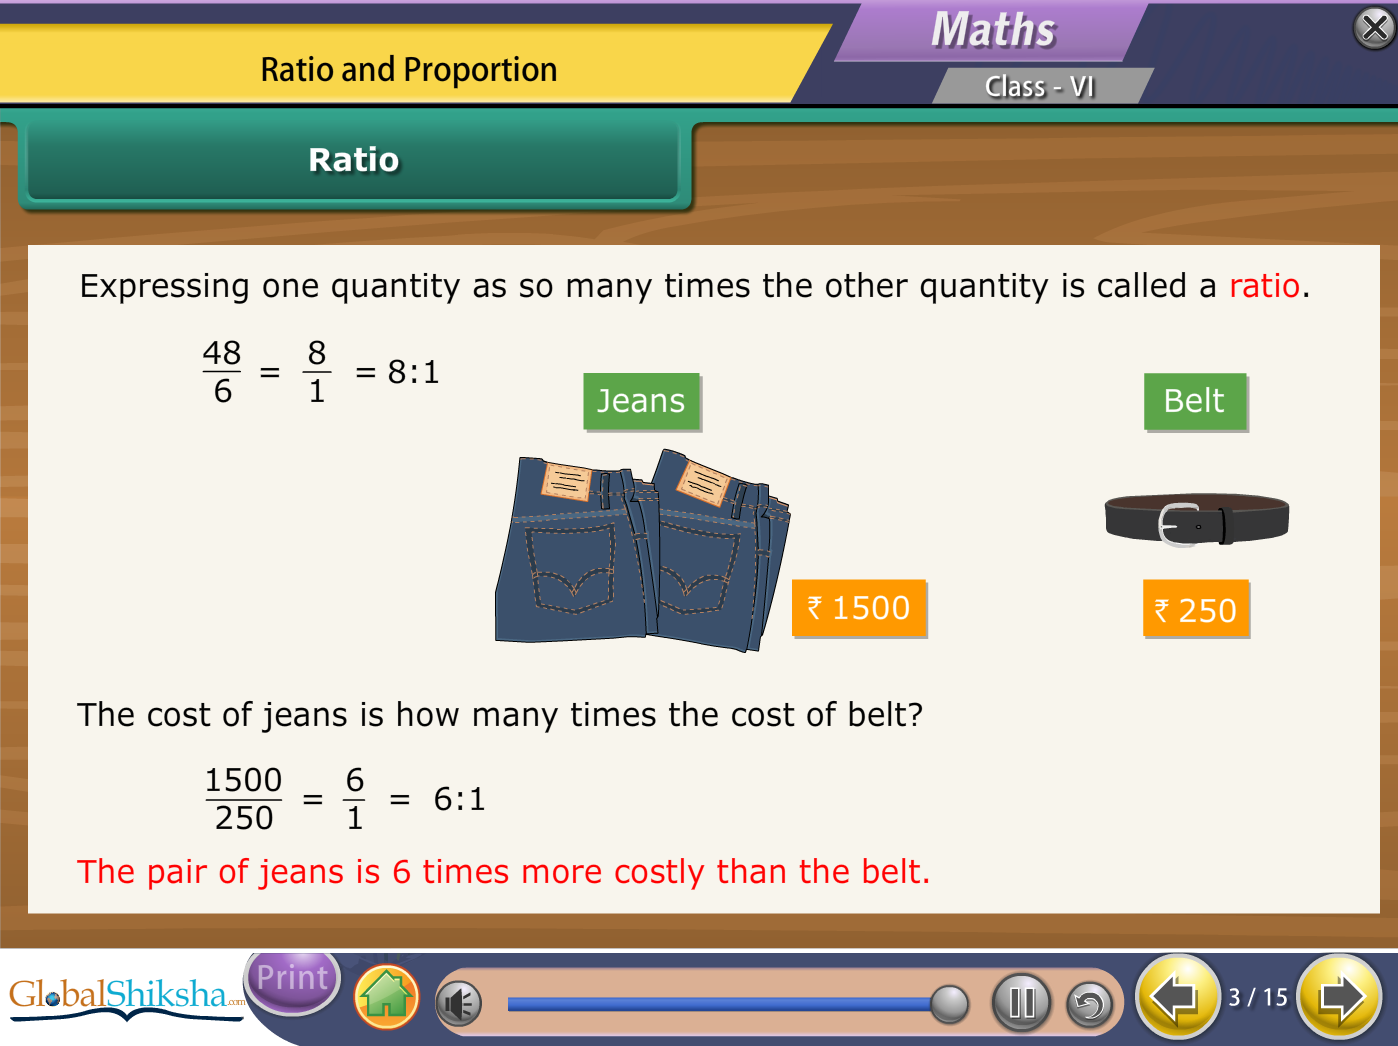 Tamil Nadu State Board Class 6 Maths & Science Animated Pendrive in English